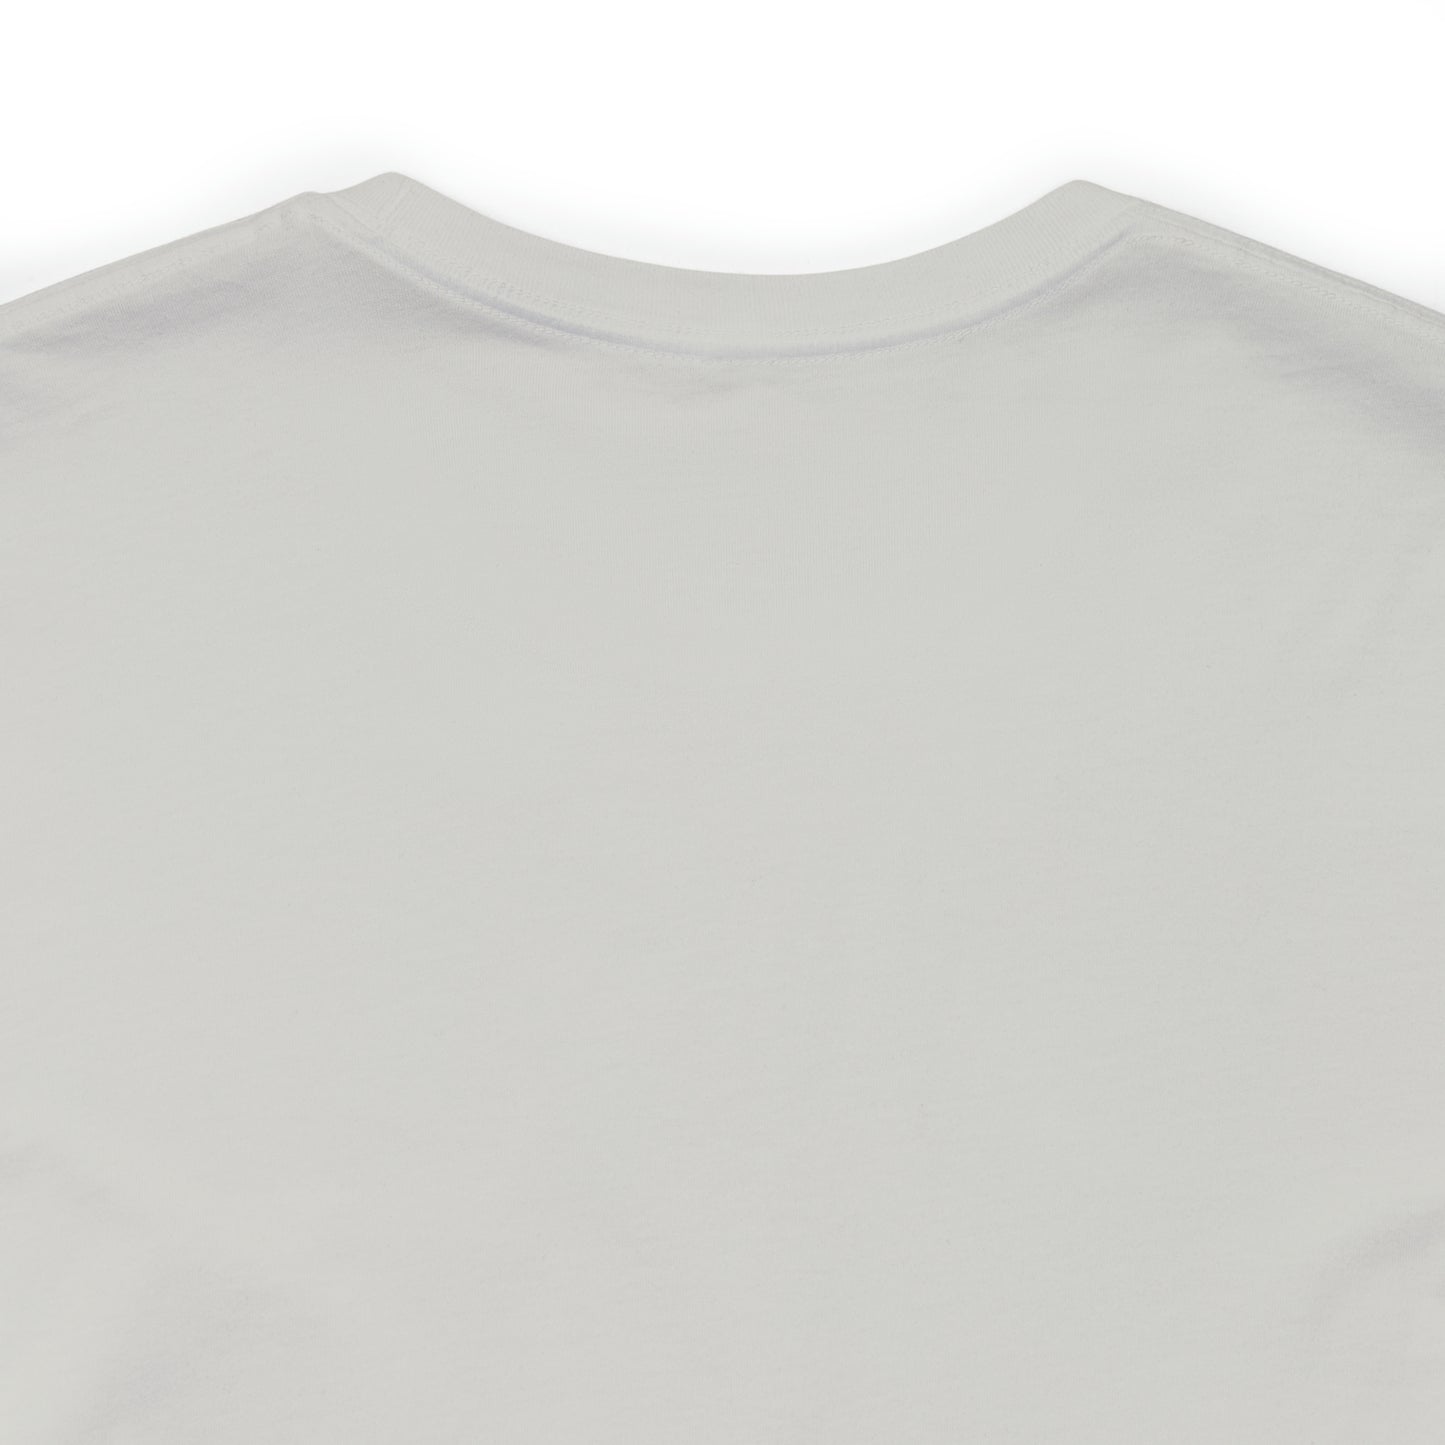 Amis Shapes Front Print Tee